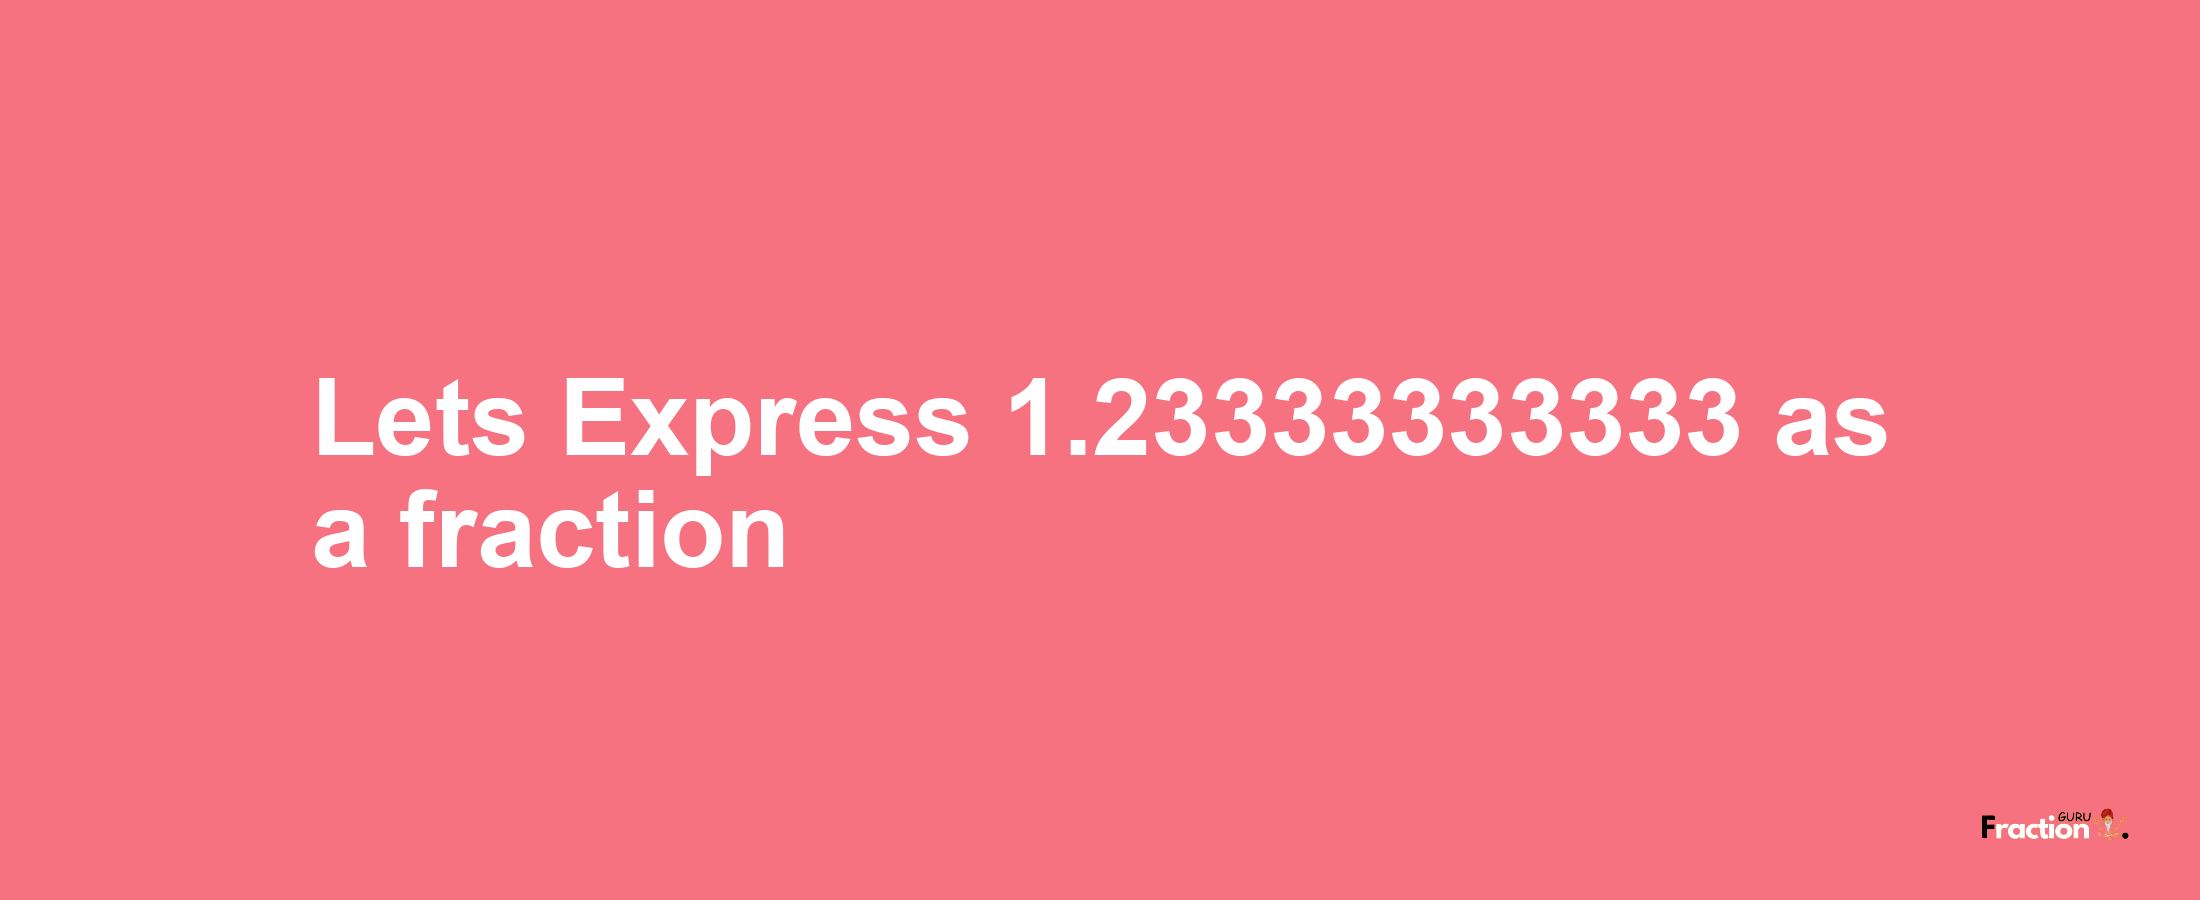 Lets Express 1.23333333333 as afraction